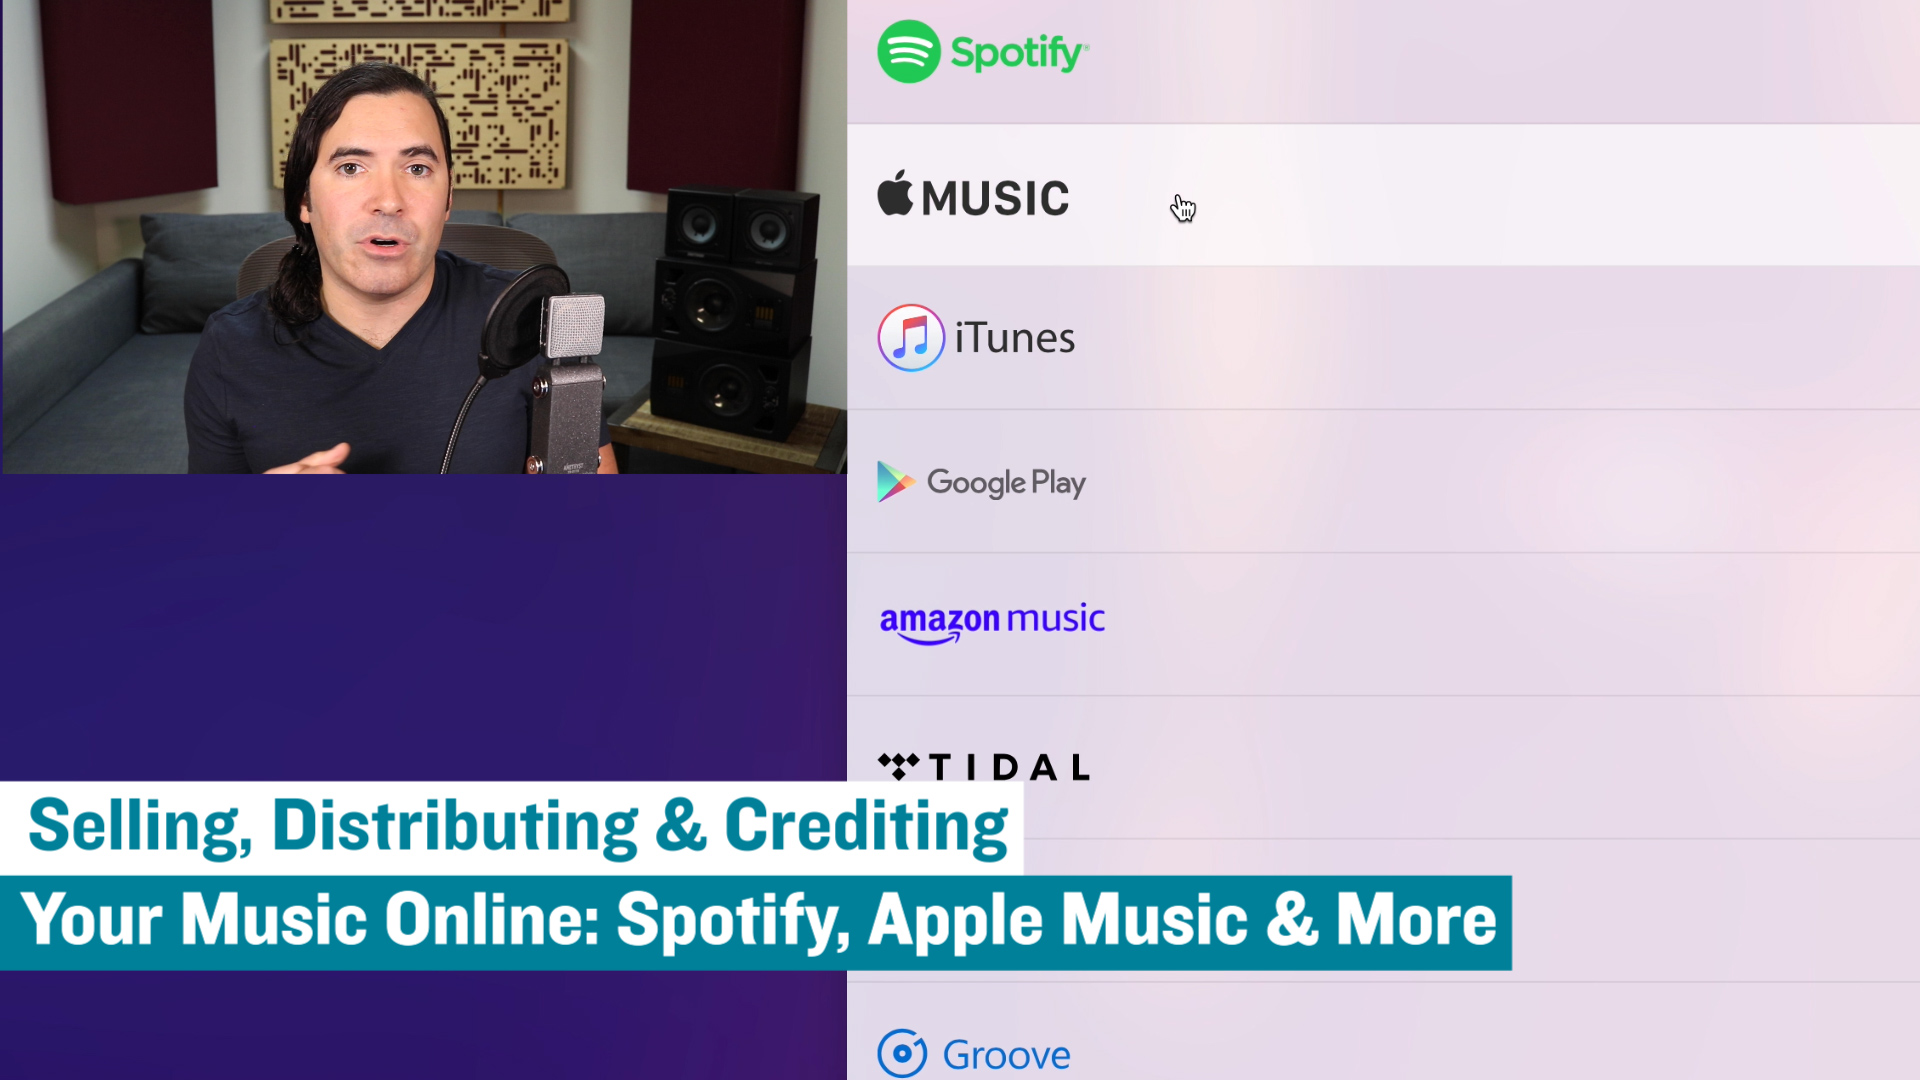 How To Sell, Distribute & Credit Your Music Online (Apple Music, Spotify, Amazon, iTunes, Tidal etc.)